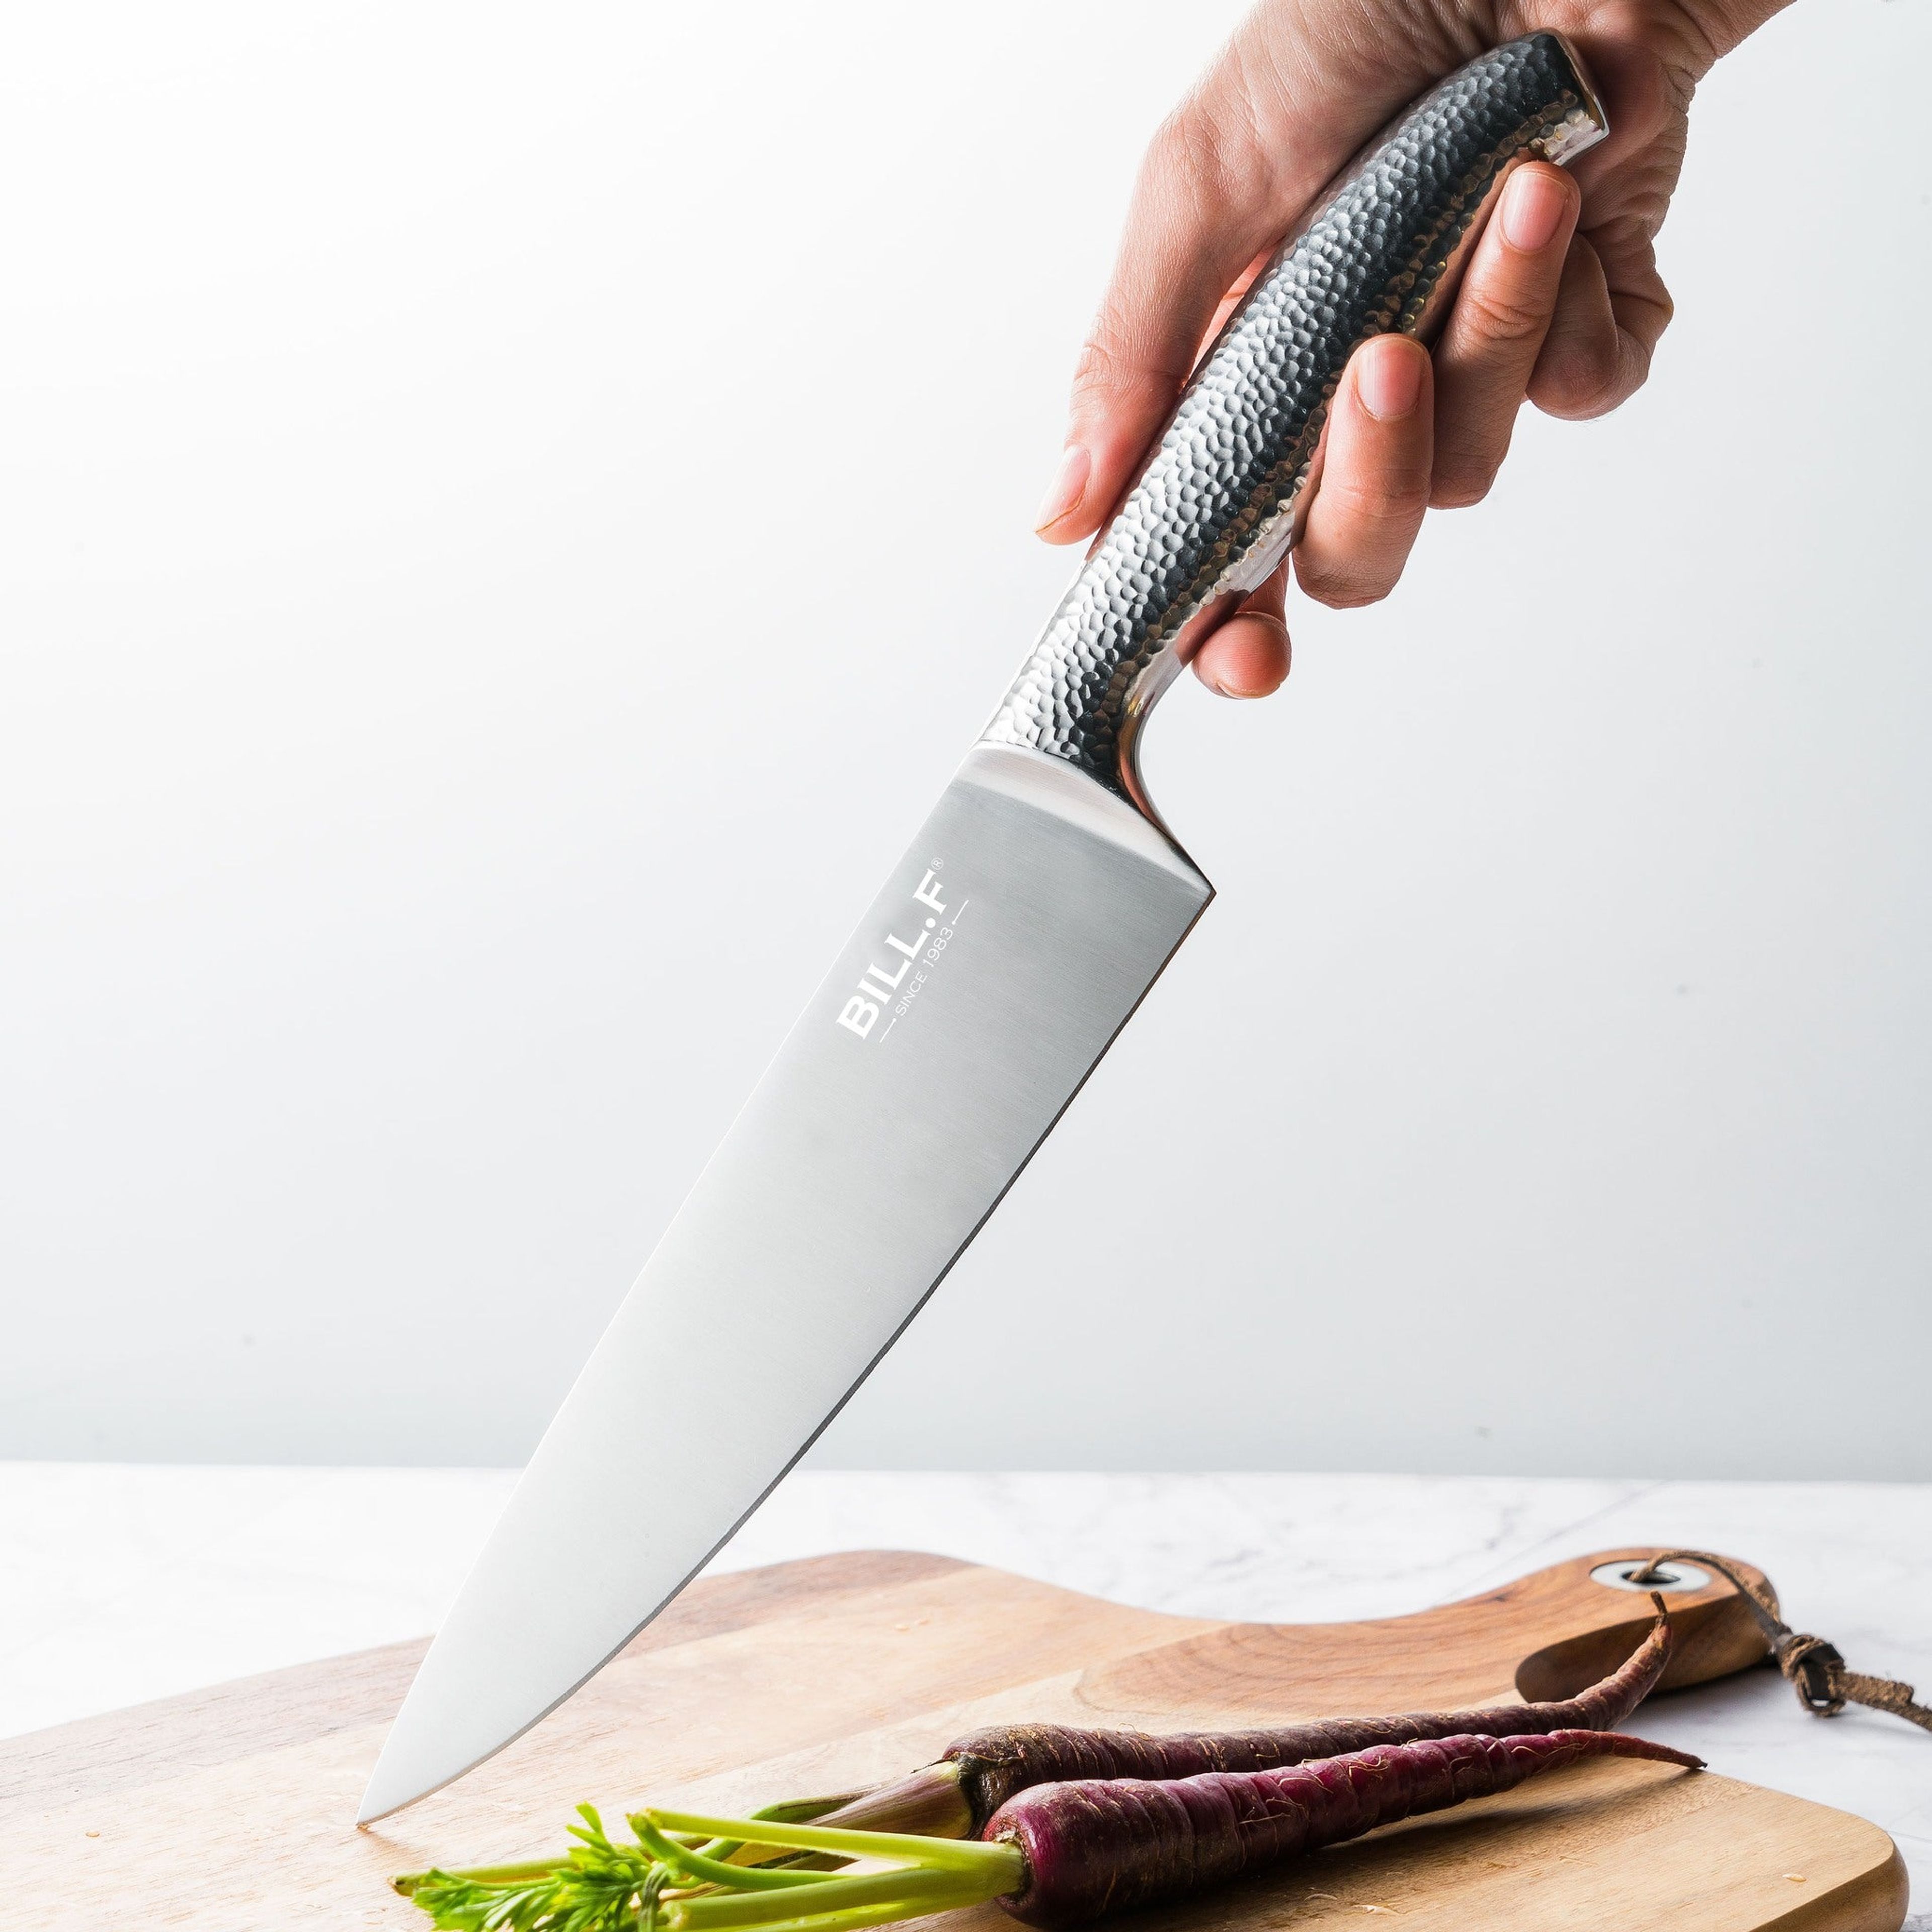 Buy 1 get 1 FREE - 8-Inch Chef's Knife